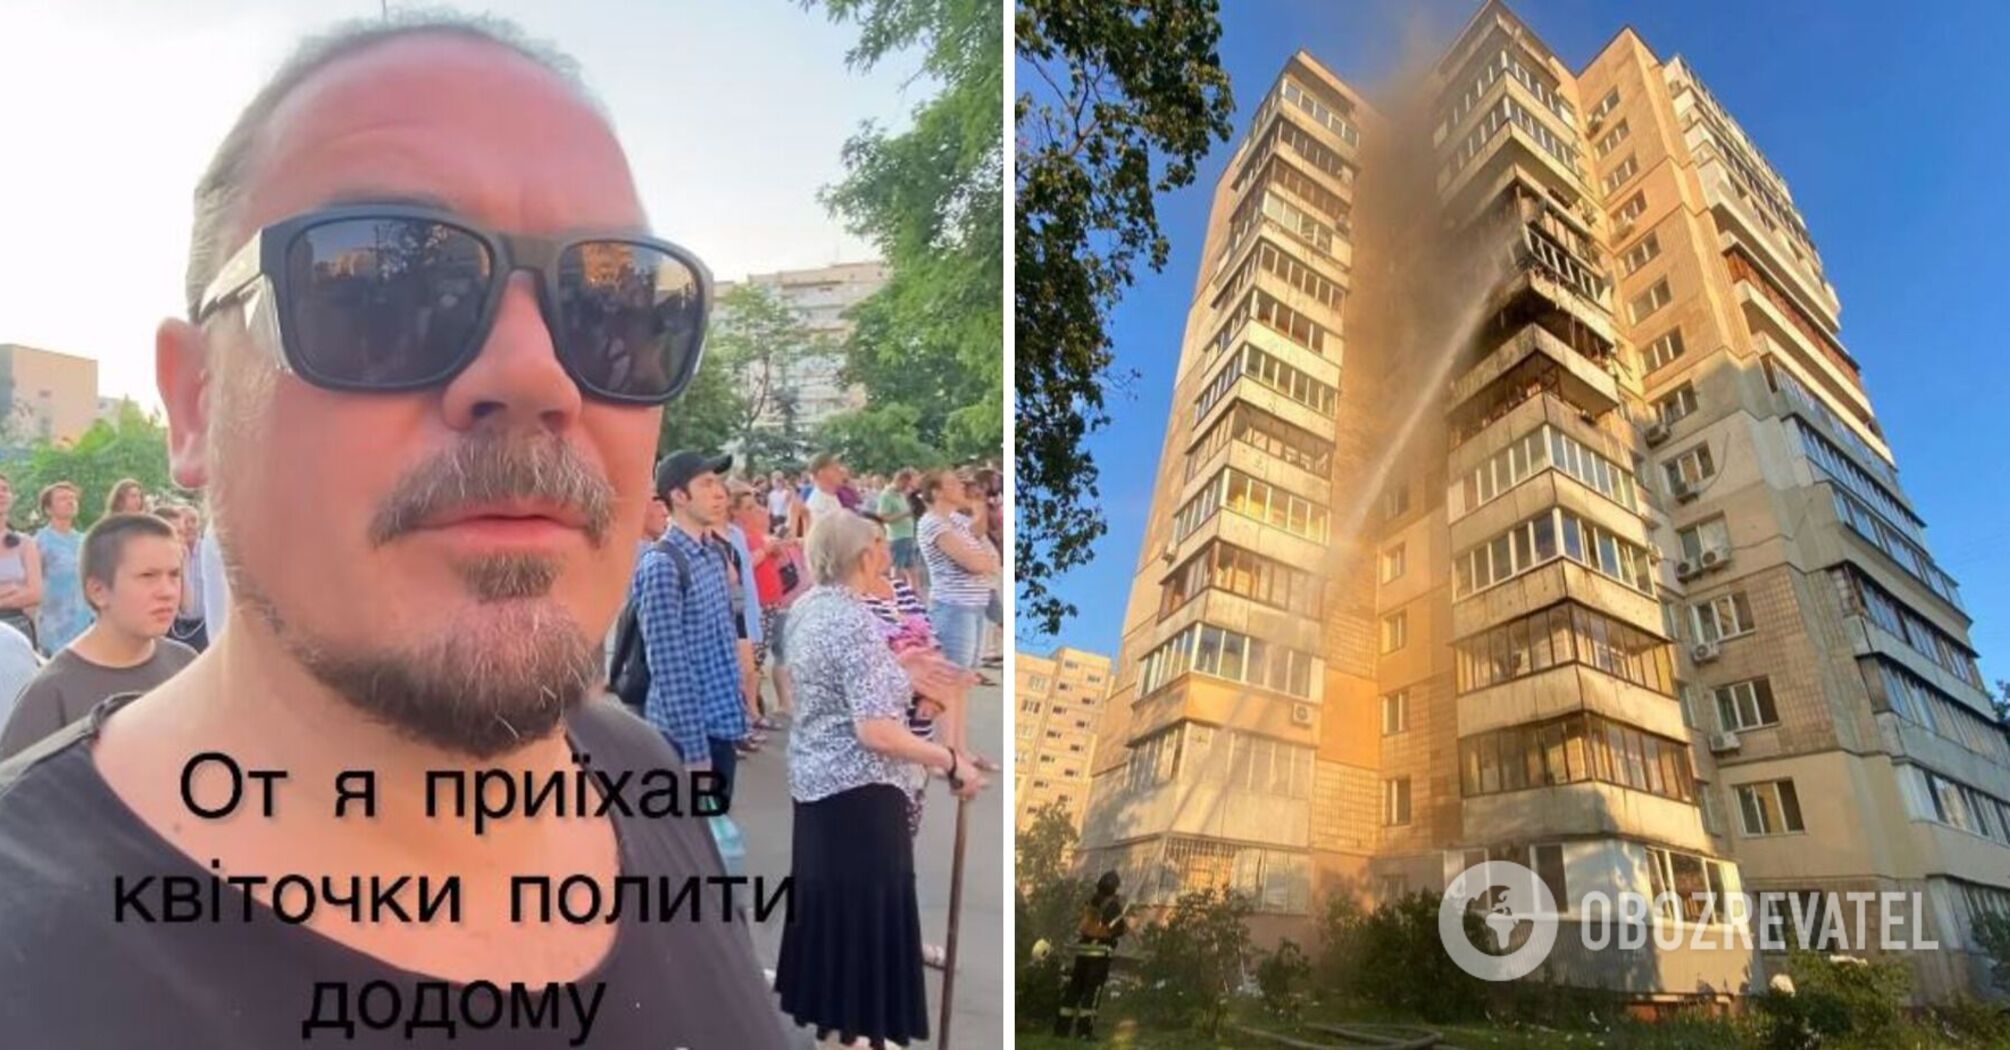 'I came to water the flowers at home'. TNMK's frontman Fagot is at the epicenter of an explosion in Kyiv